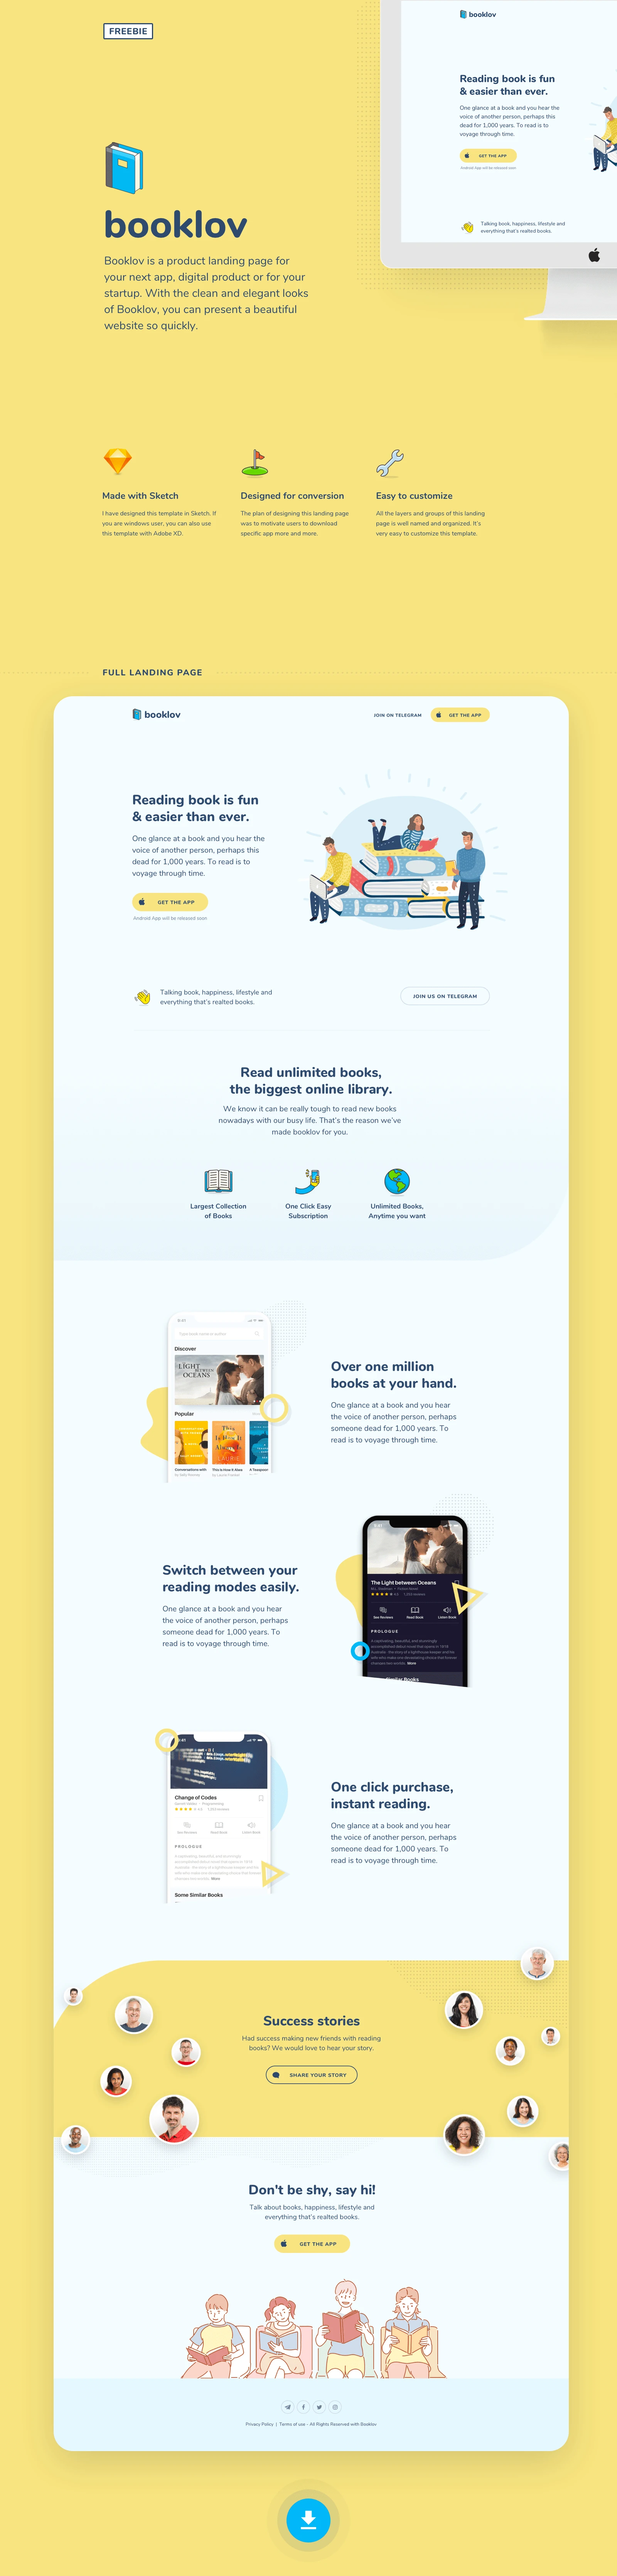 Booklov - Free Landing Page - I created this freebie for business or startup owners who are looking for a beautiful landing page to kick-start their business. You can edit this template using Adobe Photoshop, Sketch or Adobe XD. It’s completely free for personal uses.